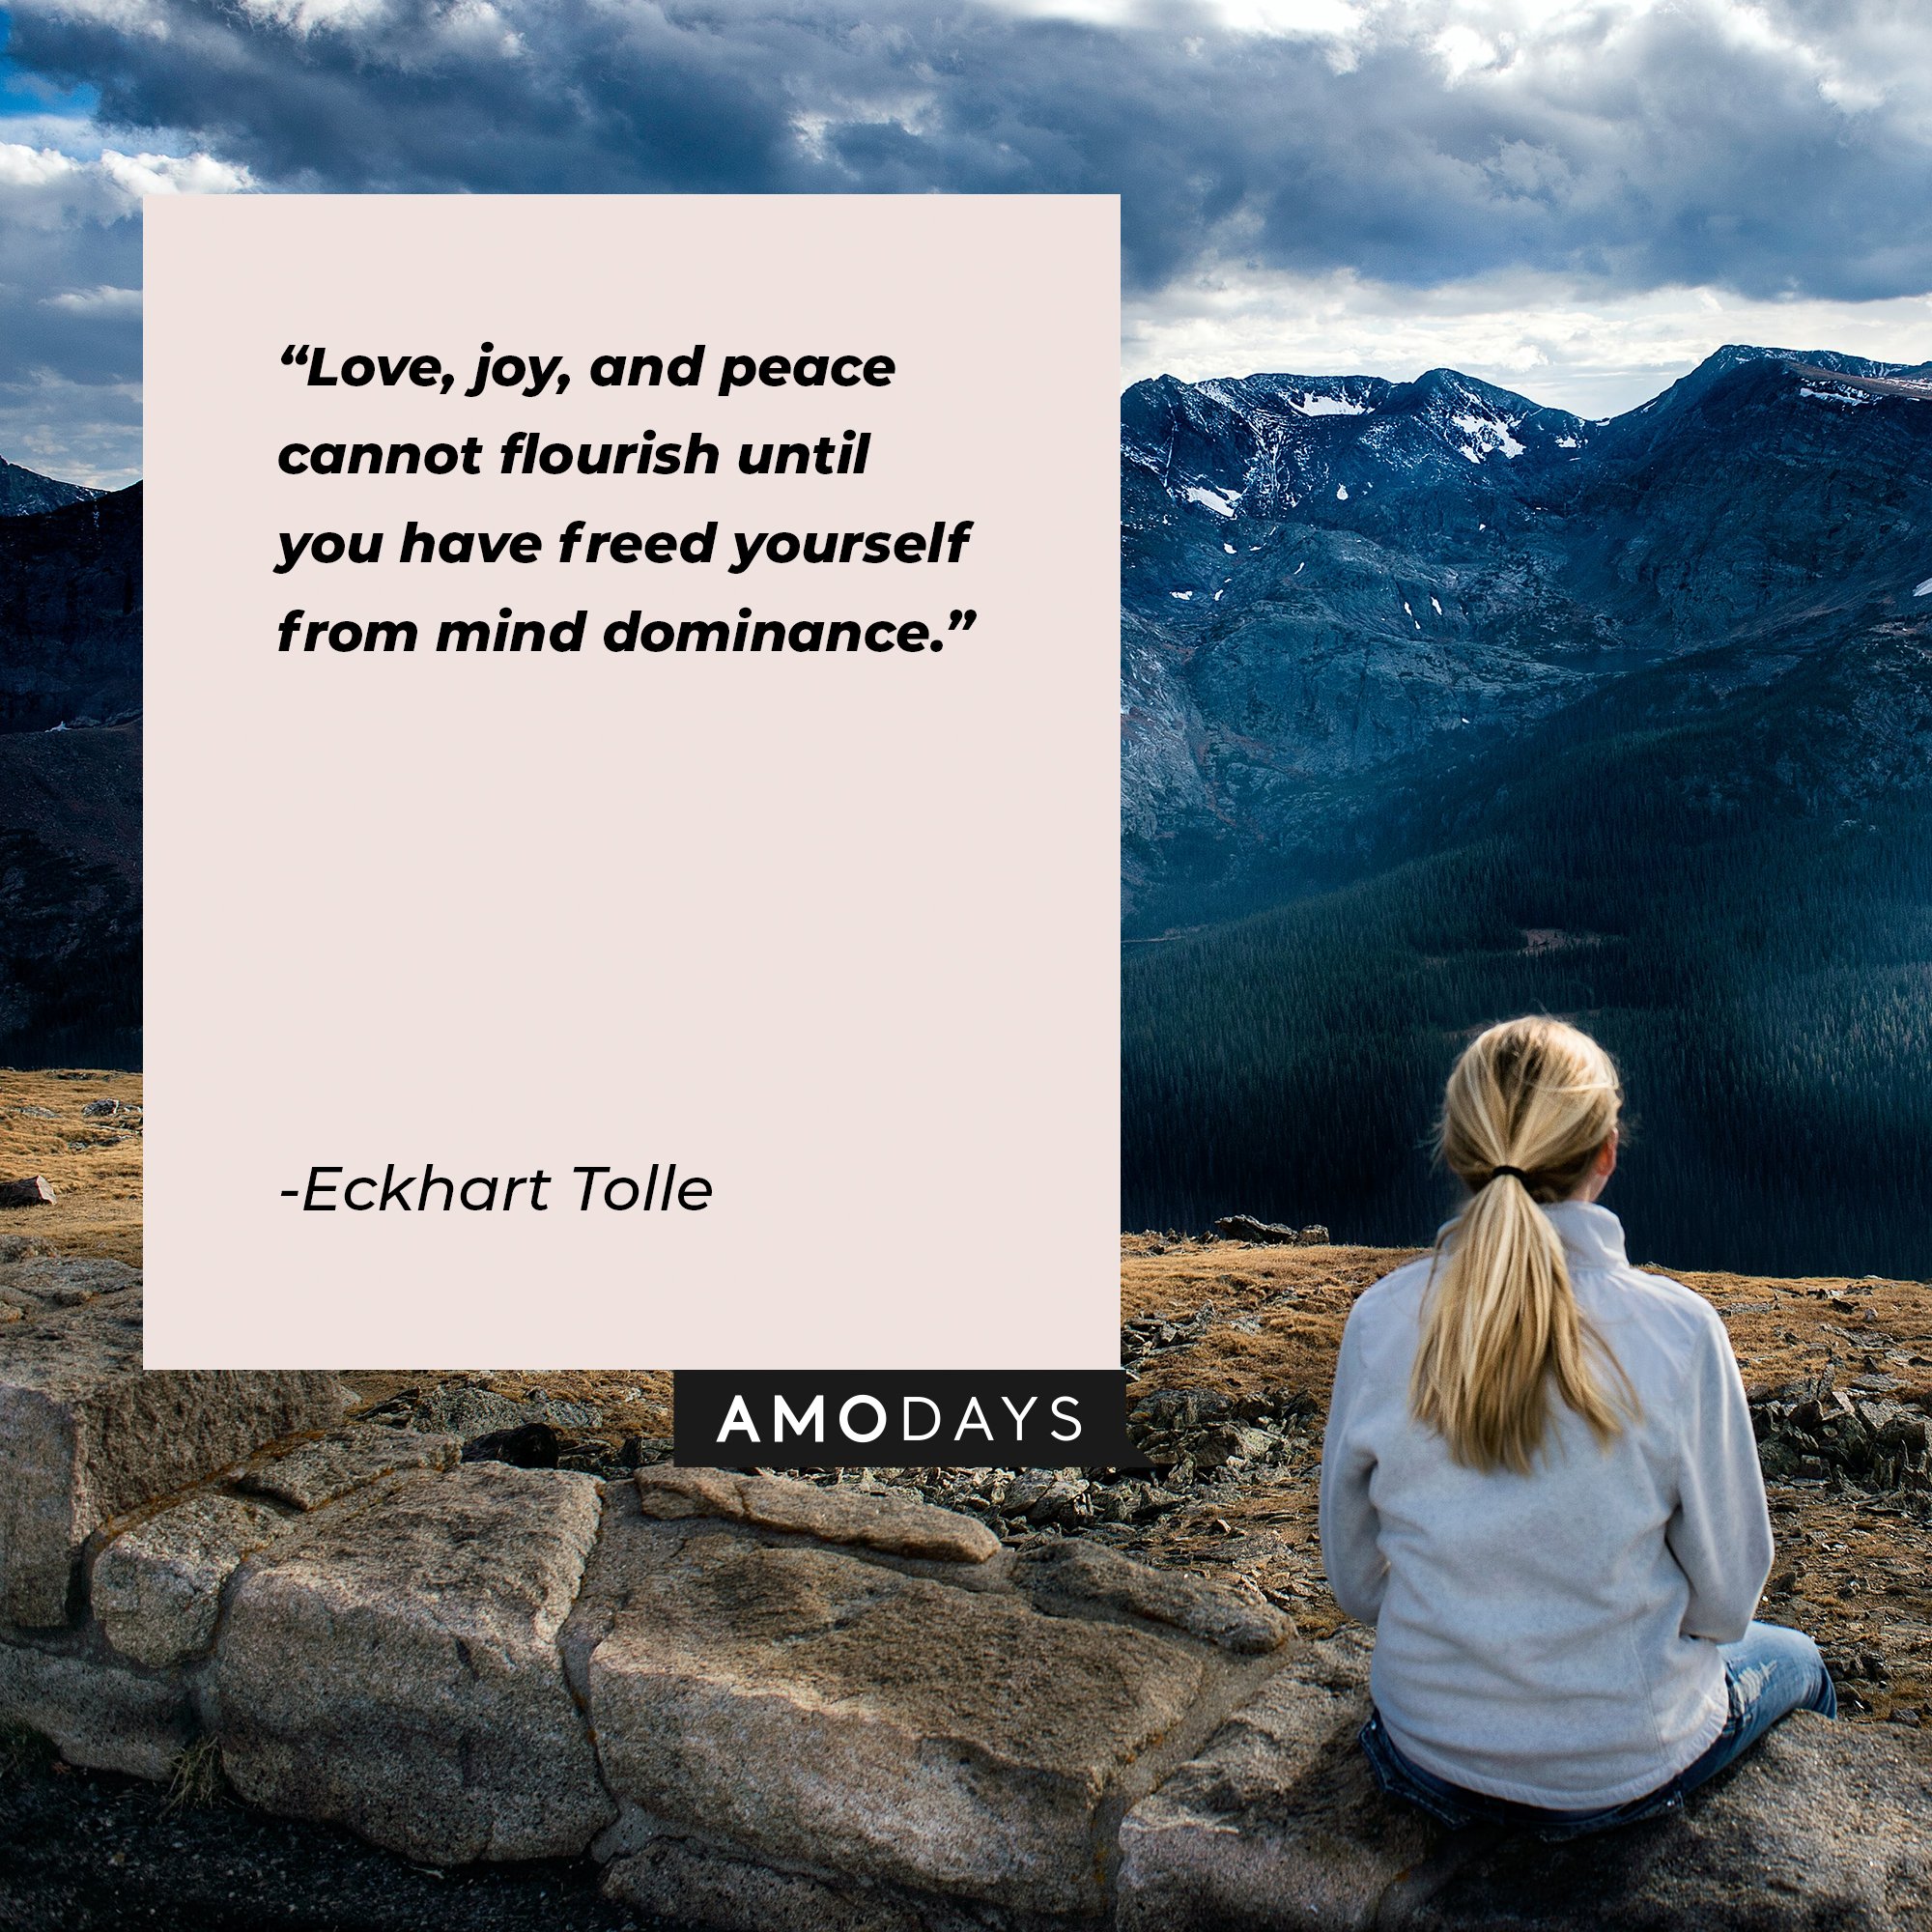 Eckhart Tolle’s quote: "Love, joy, and peace cannot flourish until you have freed yourself from mind dominance." | Image: AmoDays 